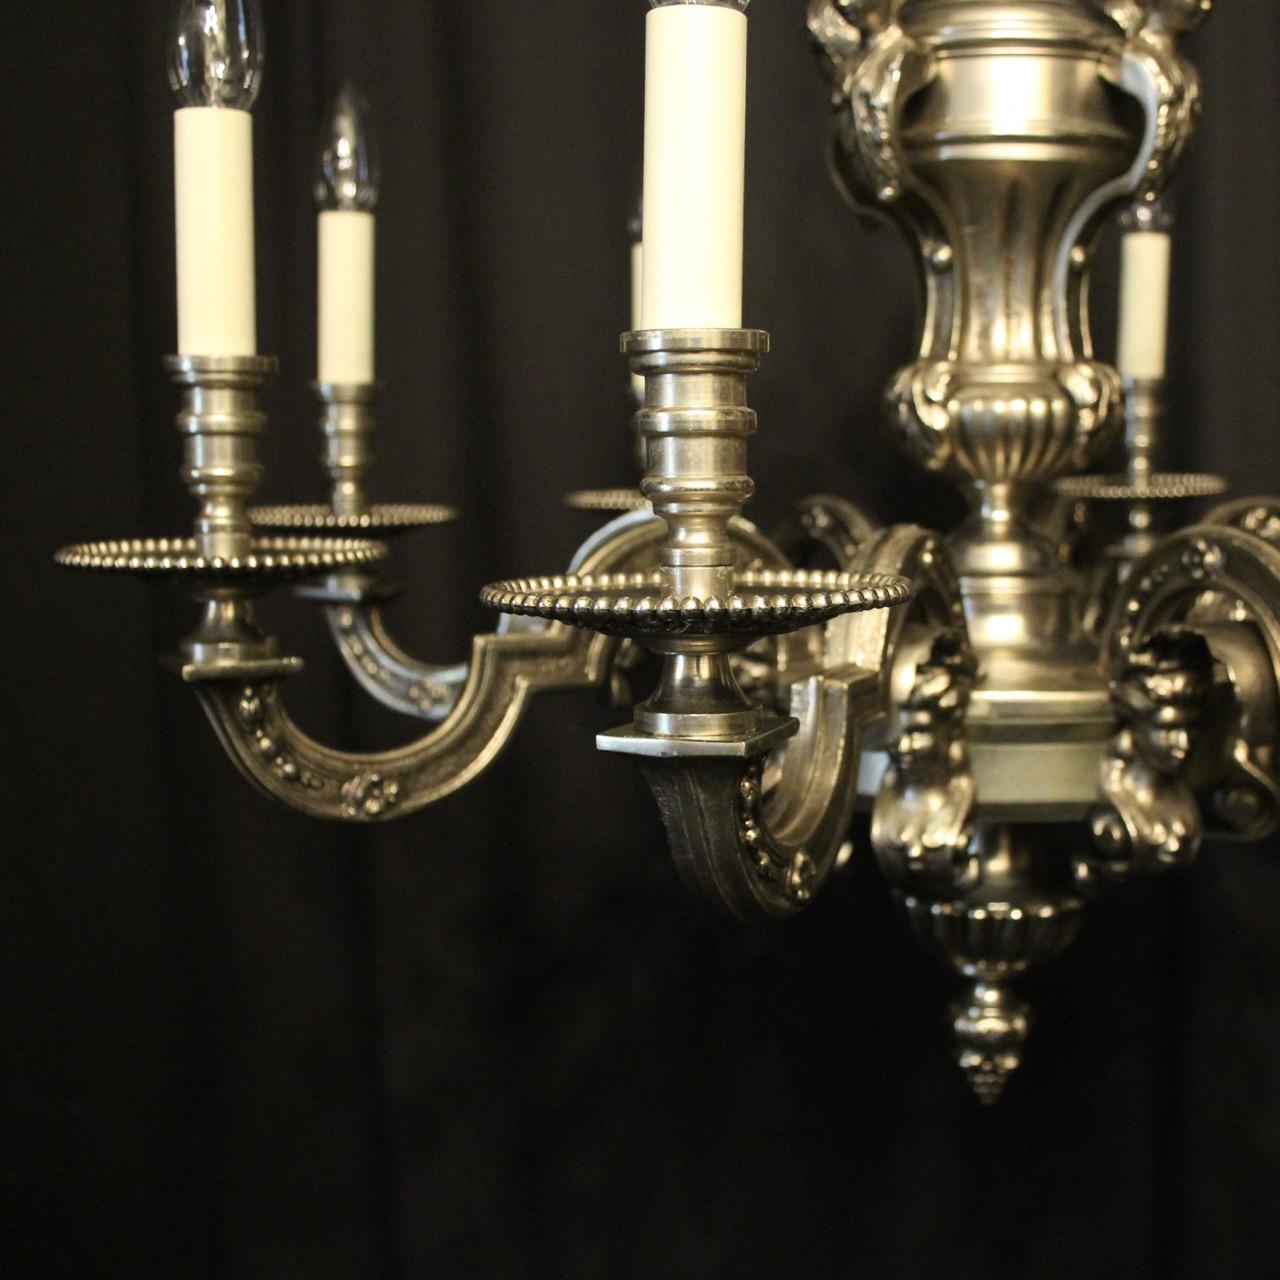 A French silver gilded cast bronze 8-light antique chandelier in the manner of Andre Charles Boulle, the square gauge scrolling arms with ornate bobéches drip pans and candle sconces, issuing from a pierced central urn stem with four female